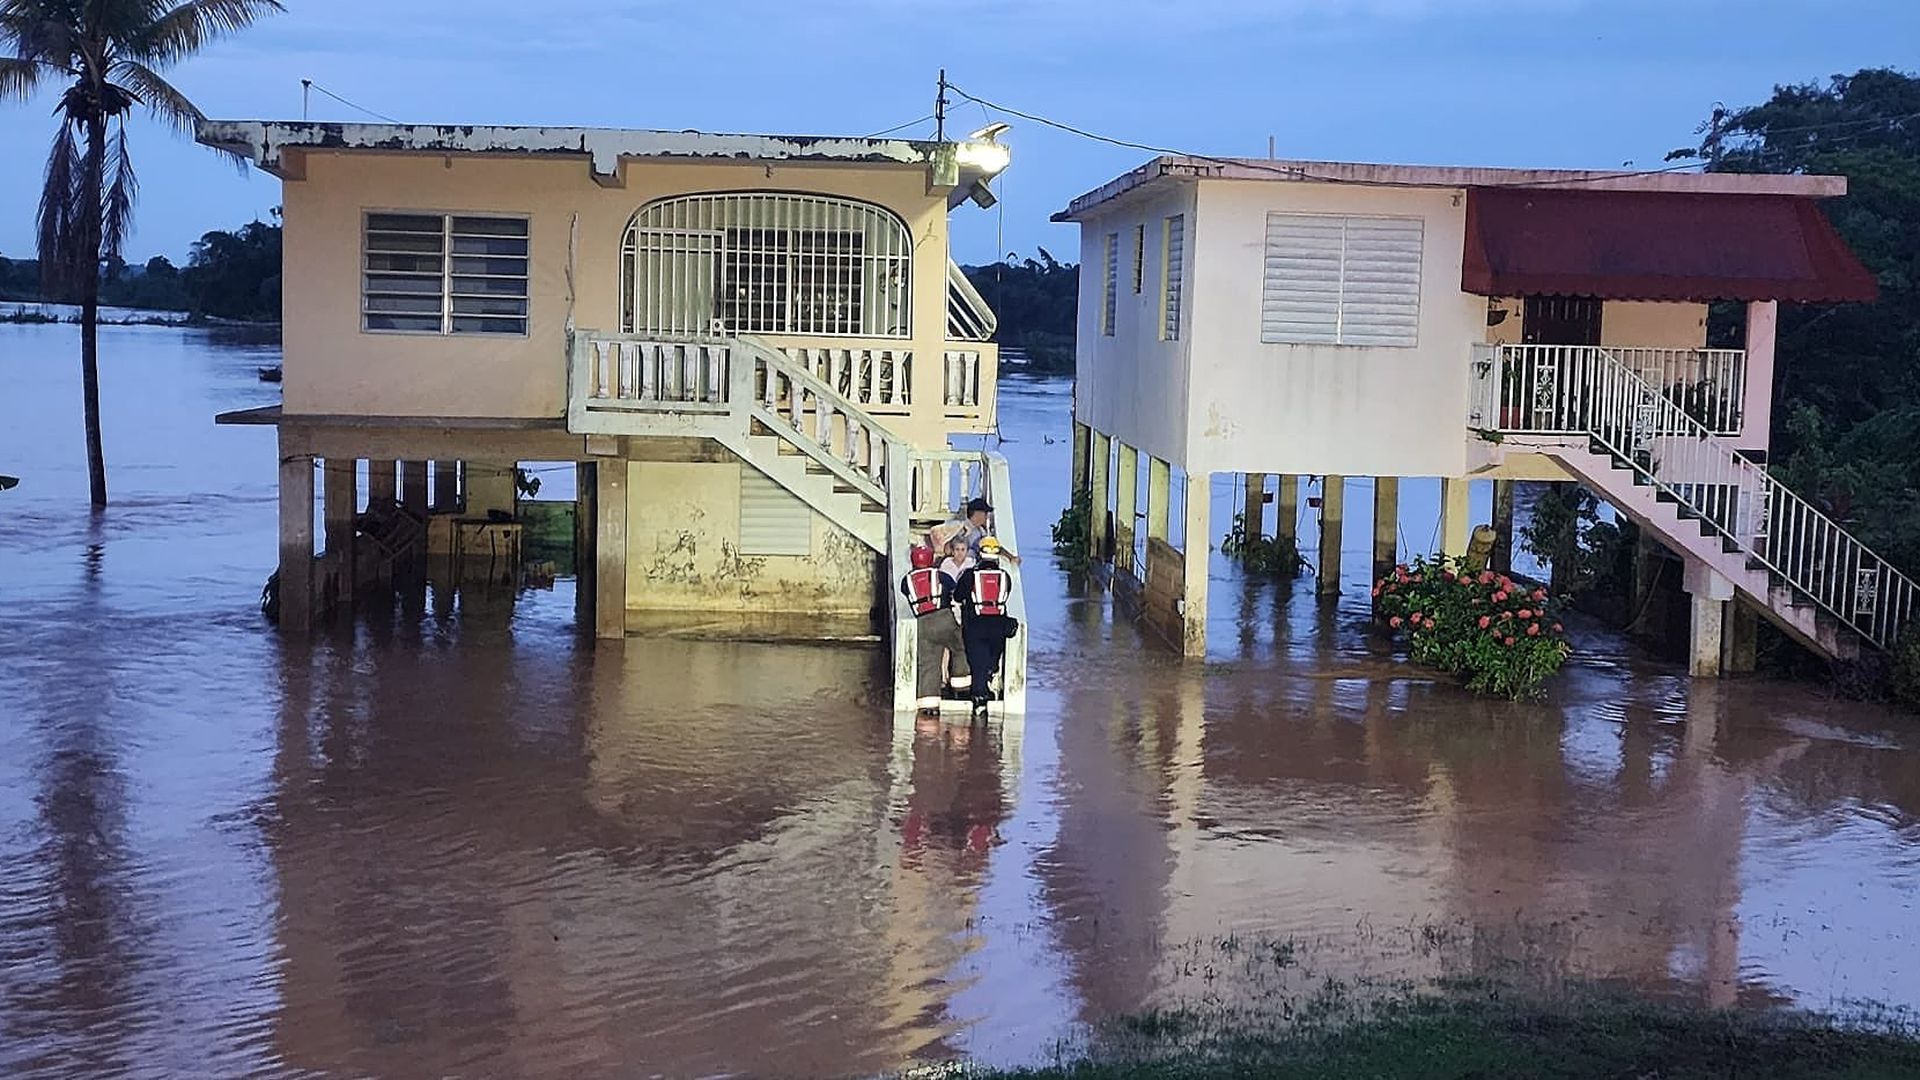 Firefighters from the DOE Barceloneta carried rescue a 91-year-old woman who was trapped in her home after a flood.